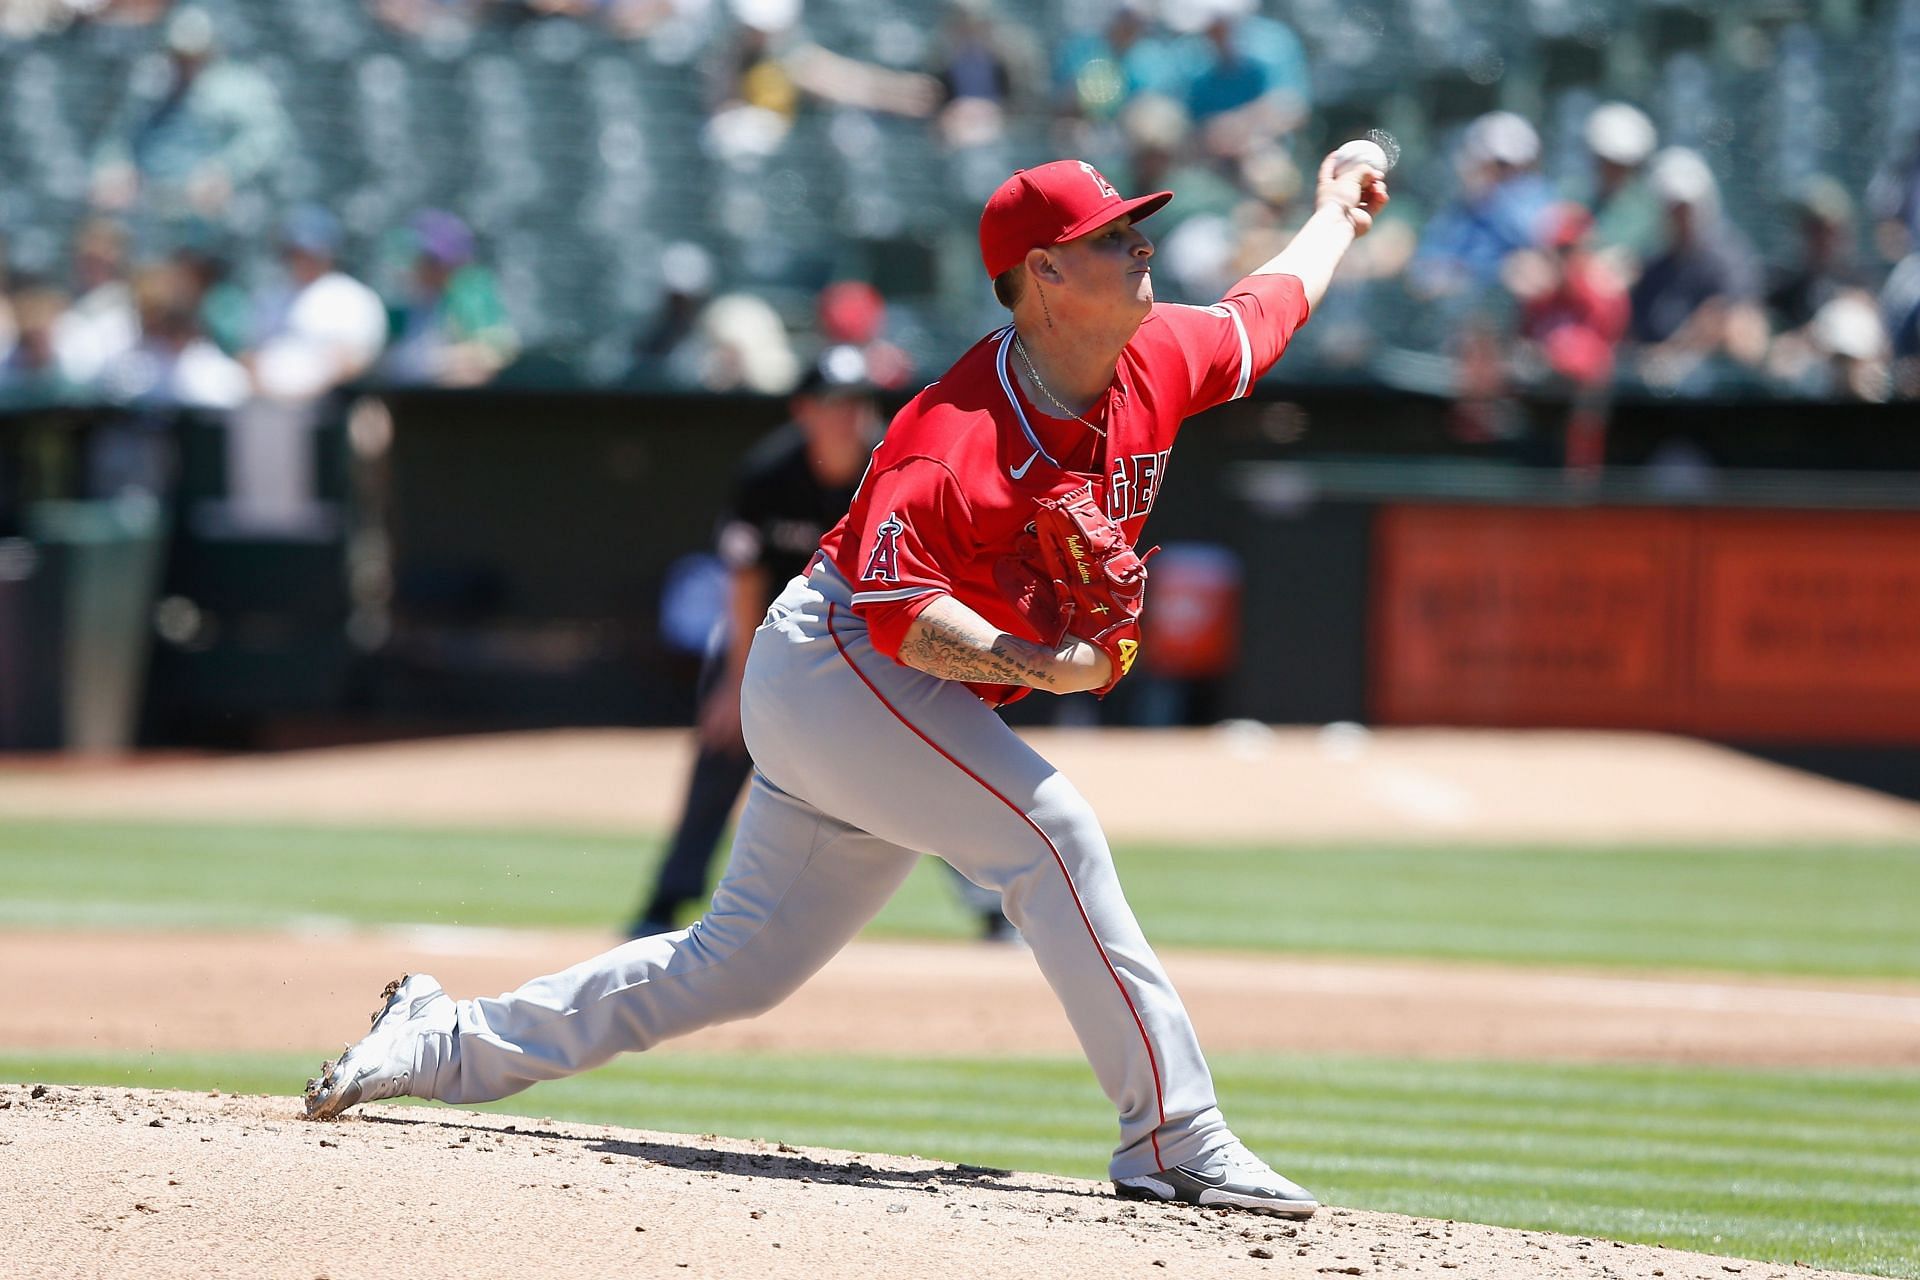 Los Angeles Angels vs Oakland Athletics - Game One